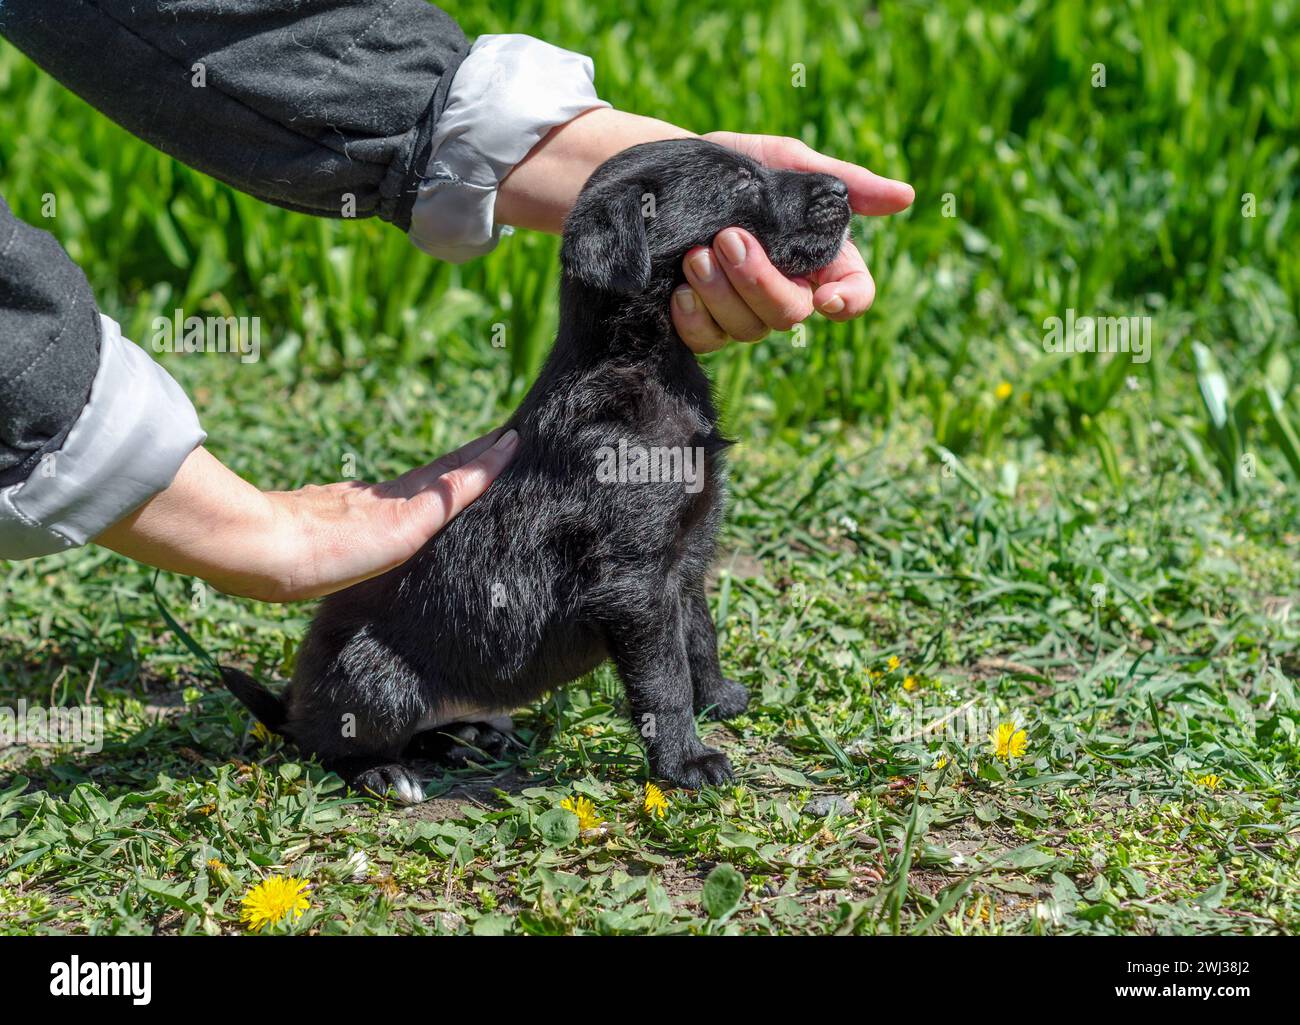 Little black mongrel puppy in female hands on a green lawn with dandelions Stock Photo